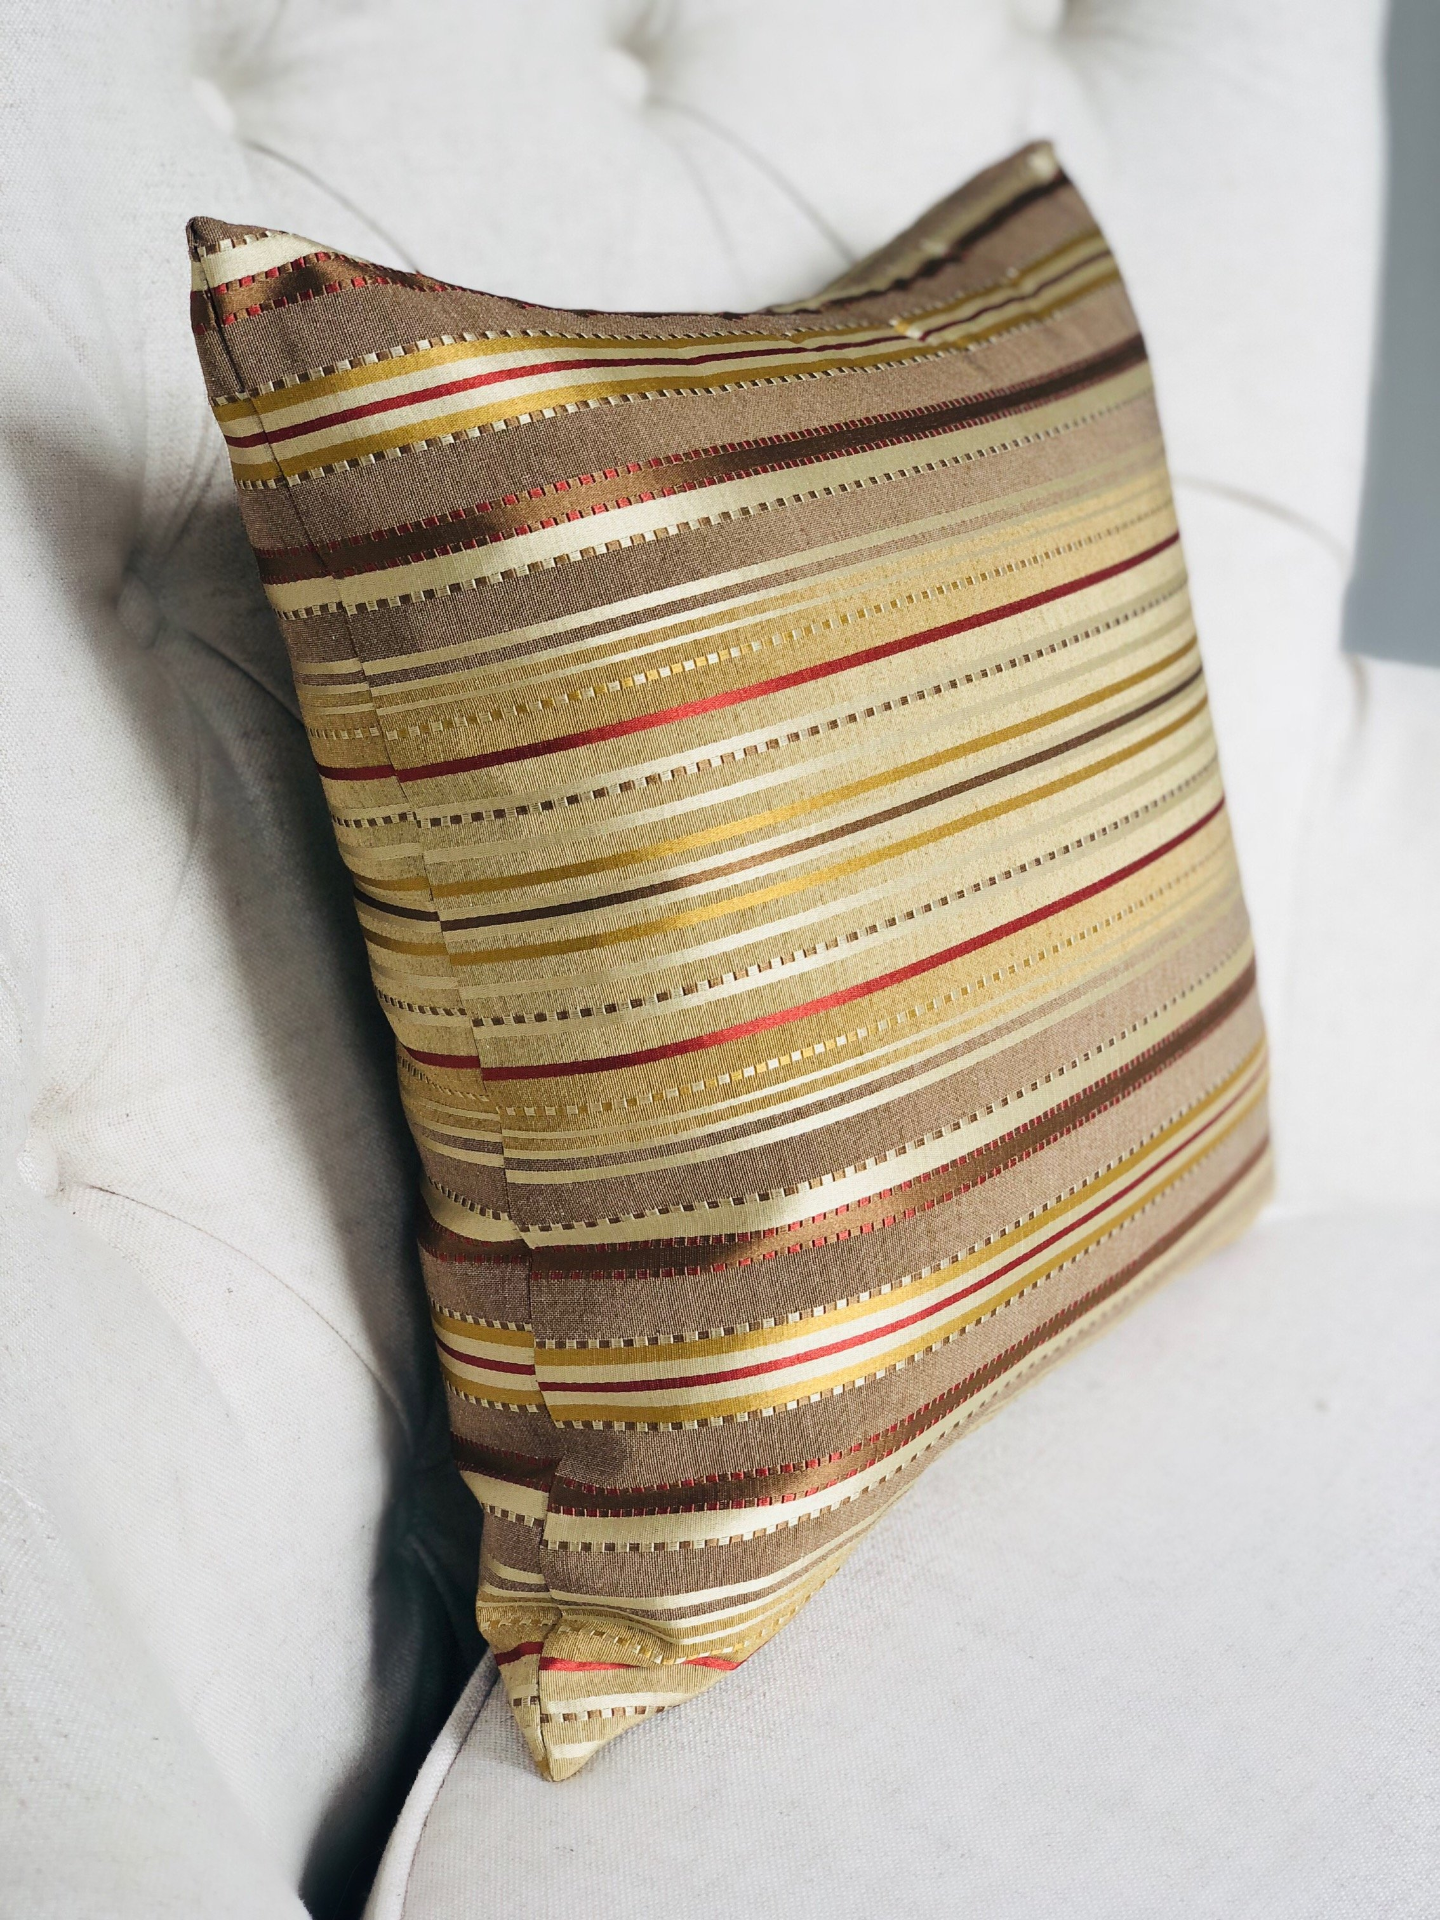 Macedonia Gold Red and Silver Handmade Luxury Pillow - Elegant Decorative Pillow